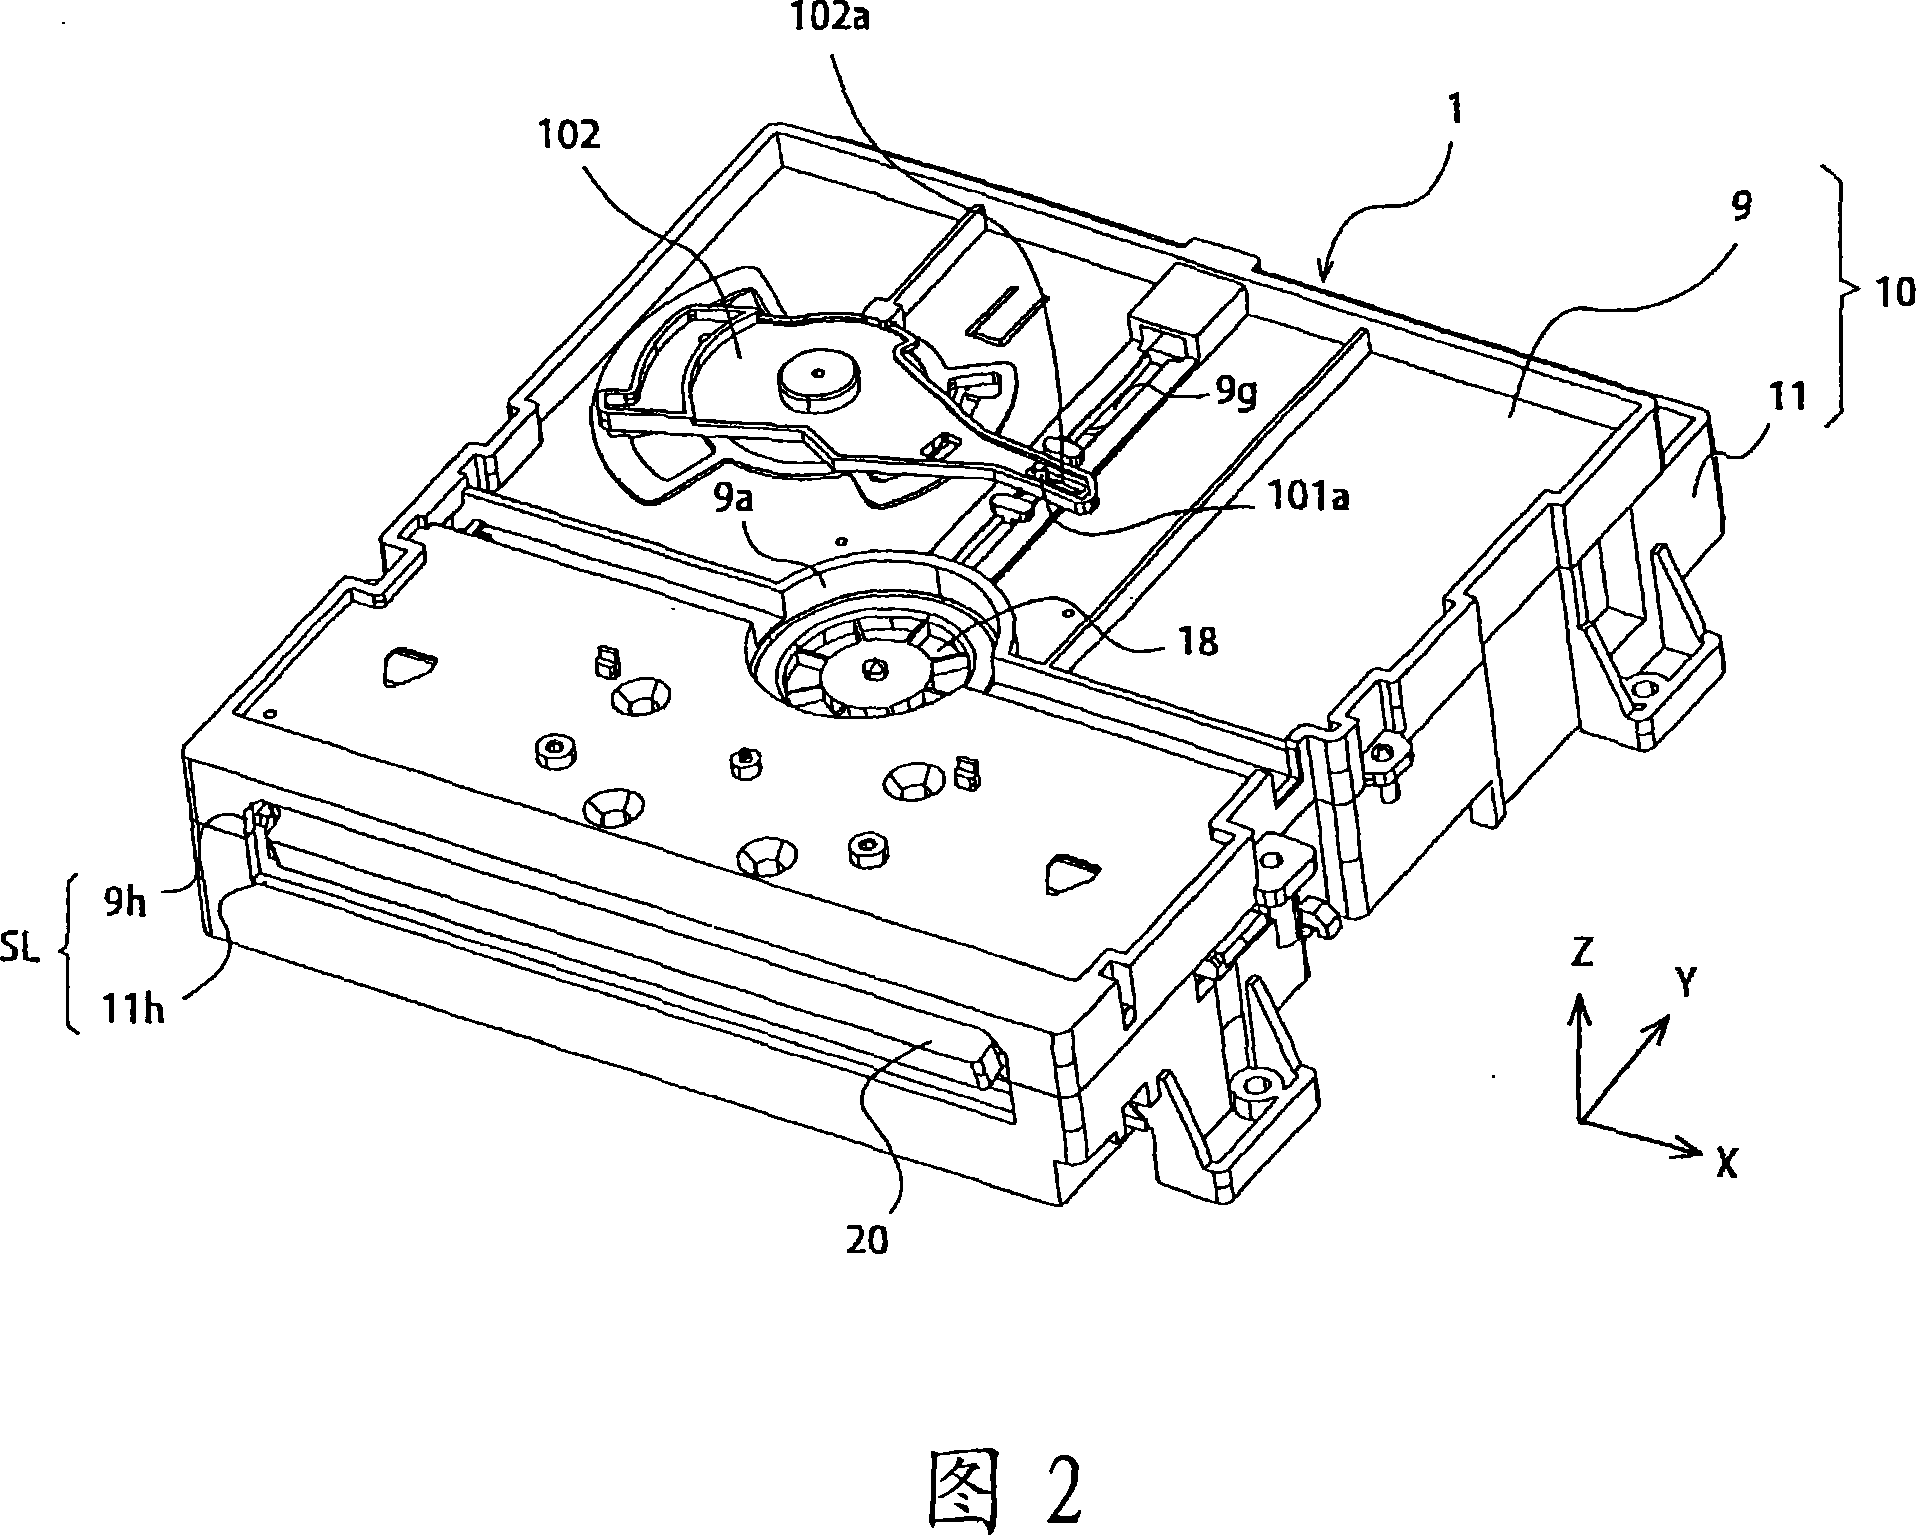 Disk device and disk loading mechanism